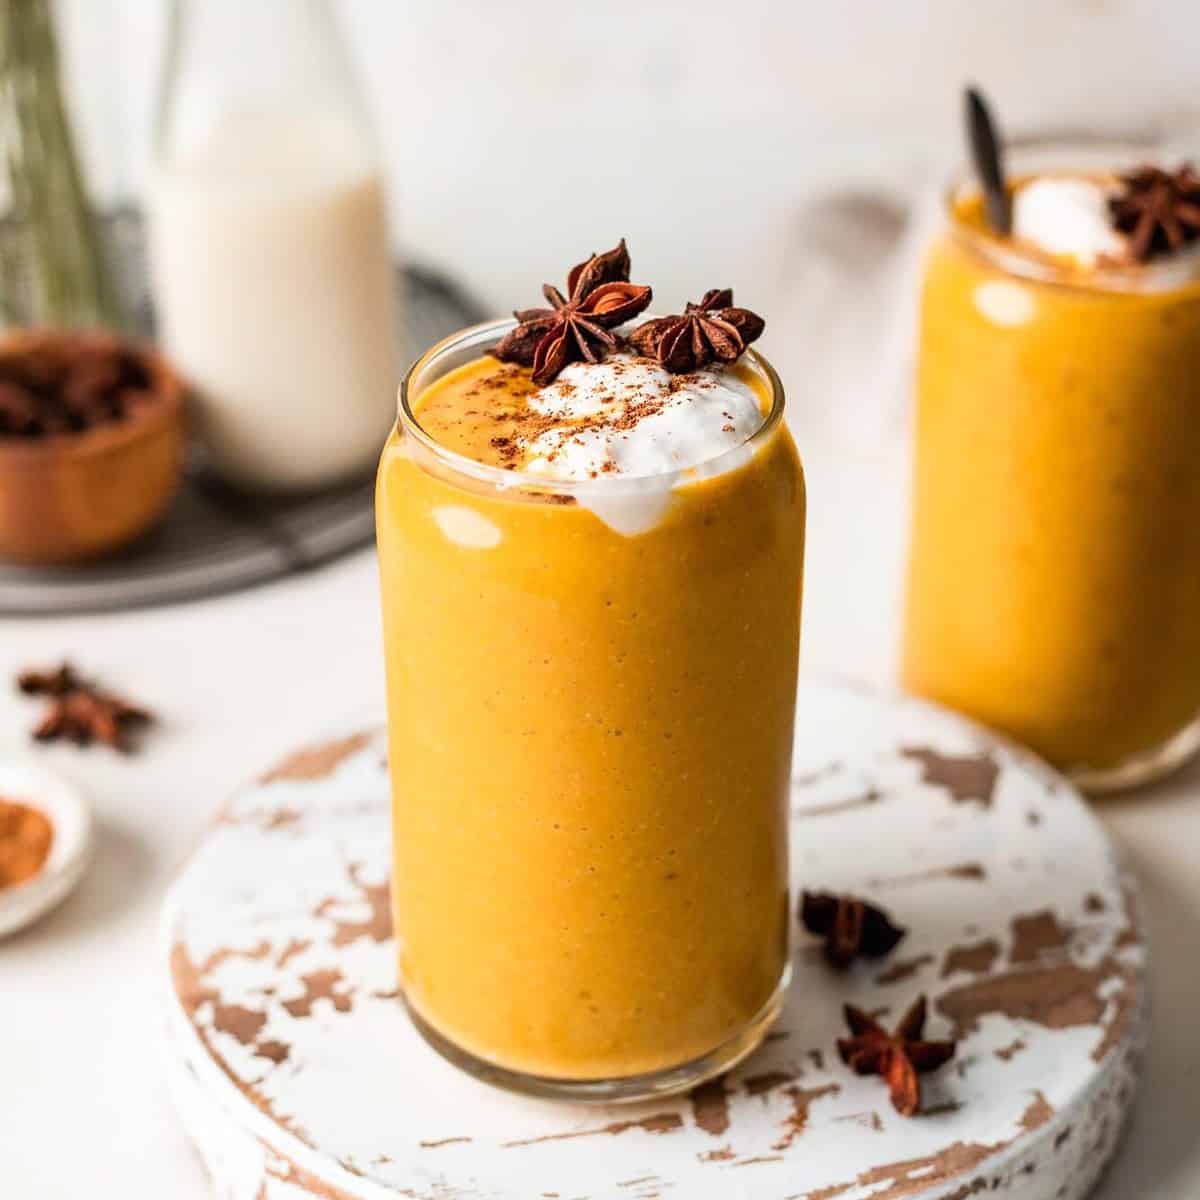  Get in the fall spirit with this delicious Vegan Pumpkin Pie Smoothie!